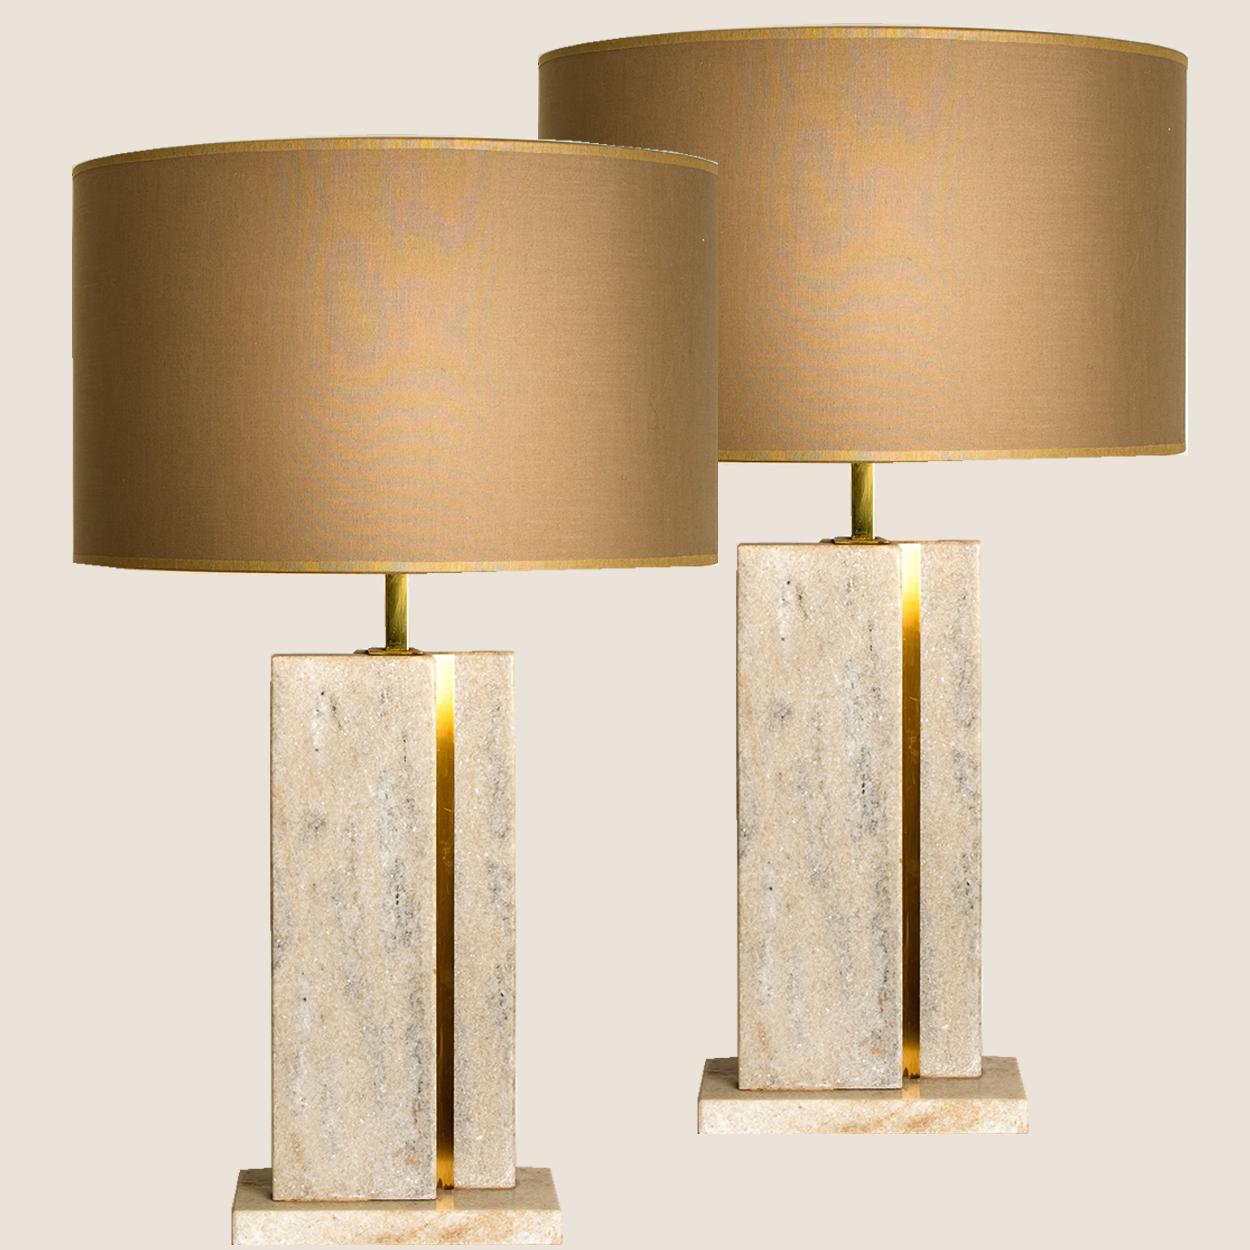 A beautiful table lamp by Camille Breesch, made in 1970 in Belgium, Europe. The rectangular base is made of travertine with brass details. Travertine is a form of limestone and can be found in several places in Europe.

Camille Breesch was an